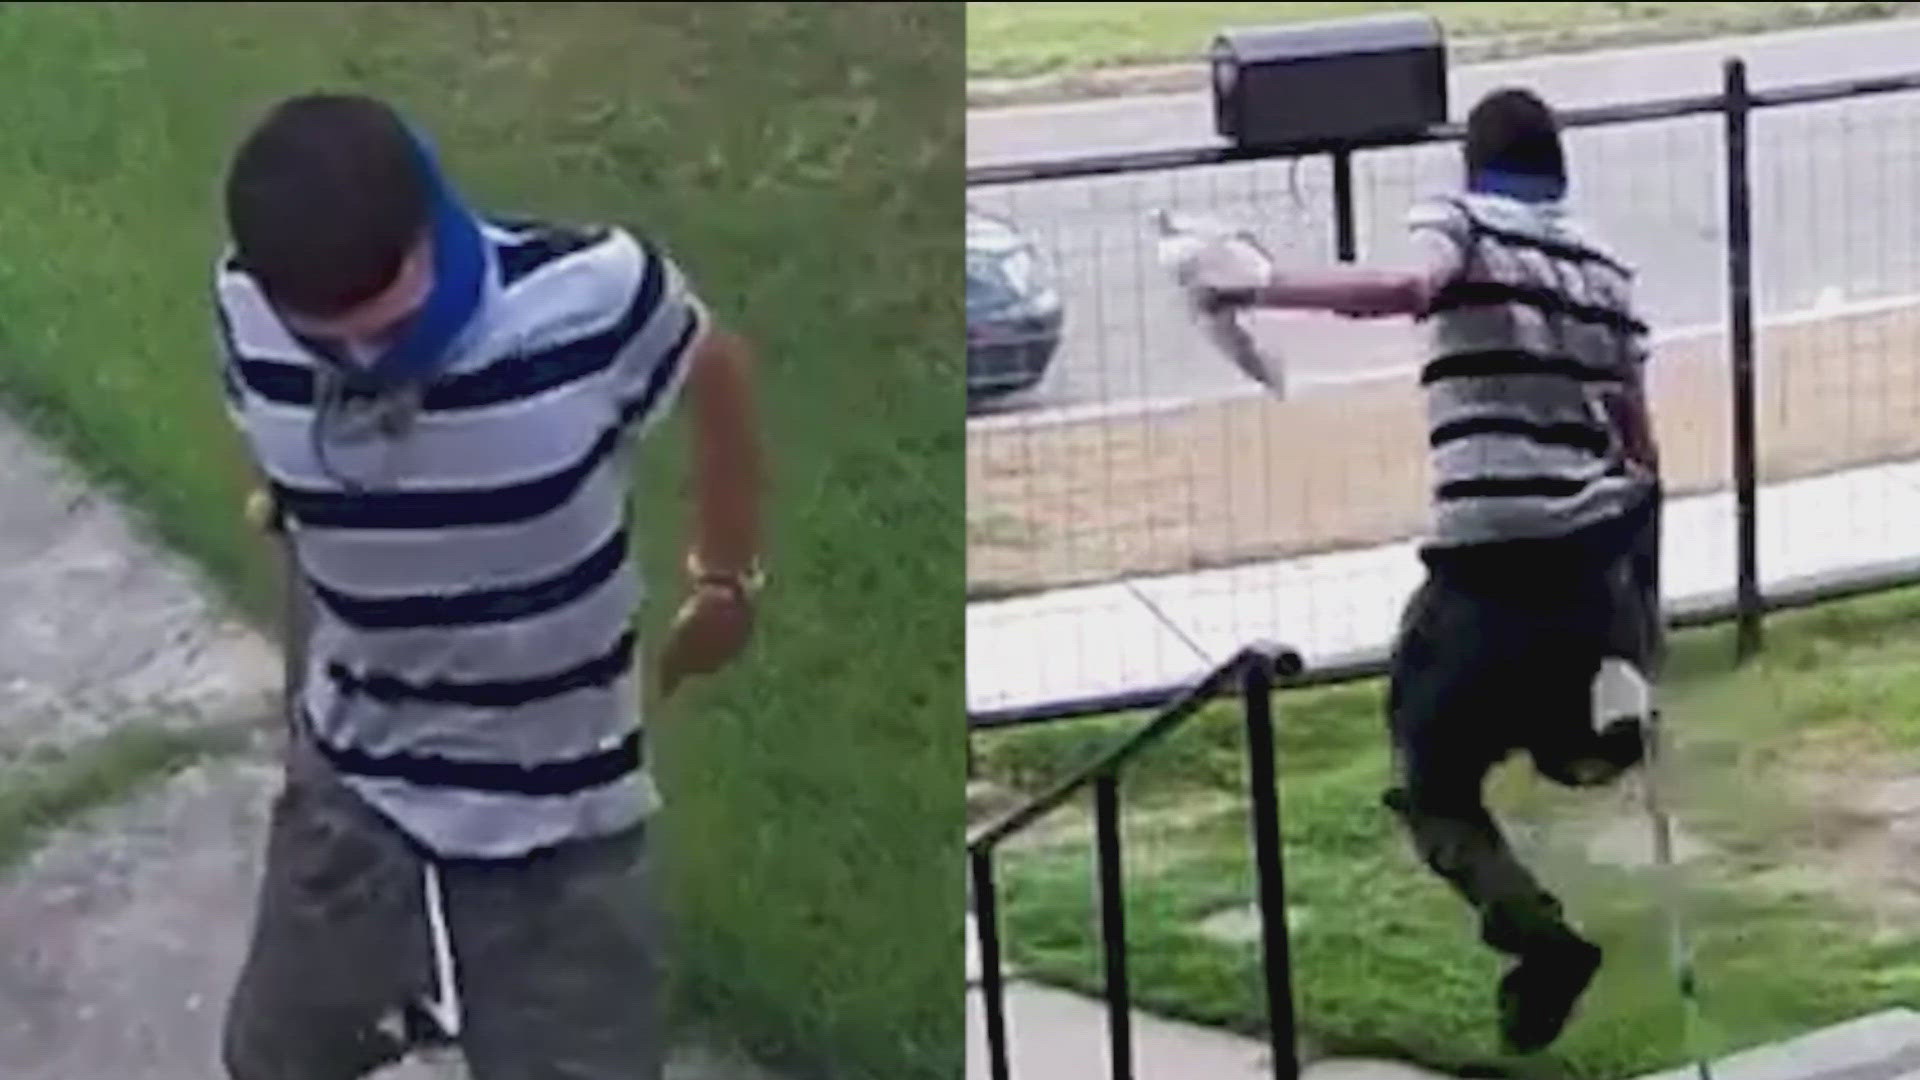 The San Antonio Police Department is currently on the look out for the alleged 'porch pirate' who was caught on camera stealing various packages.